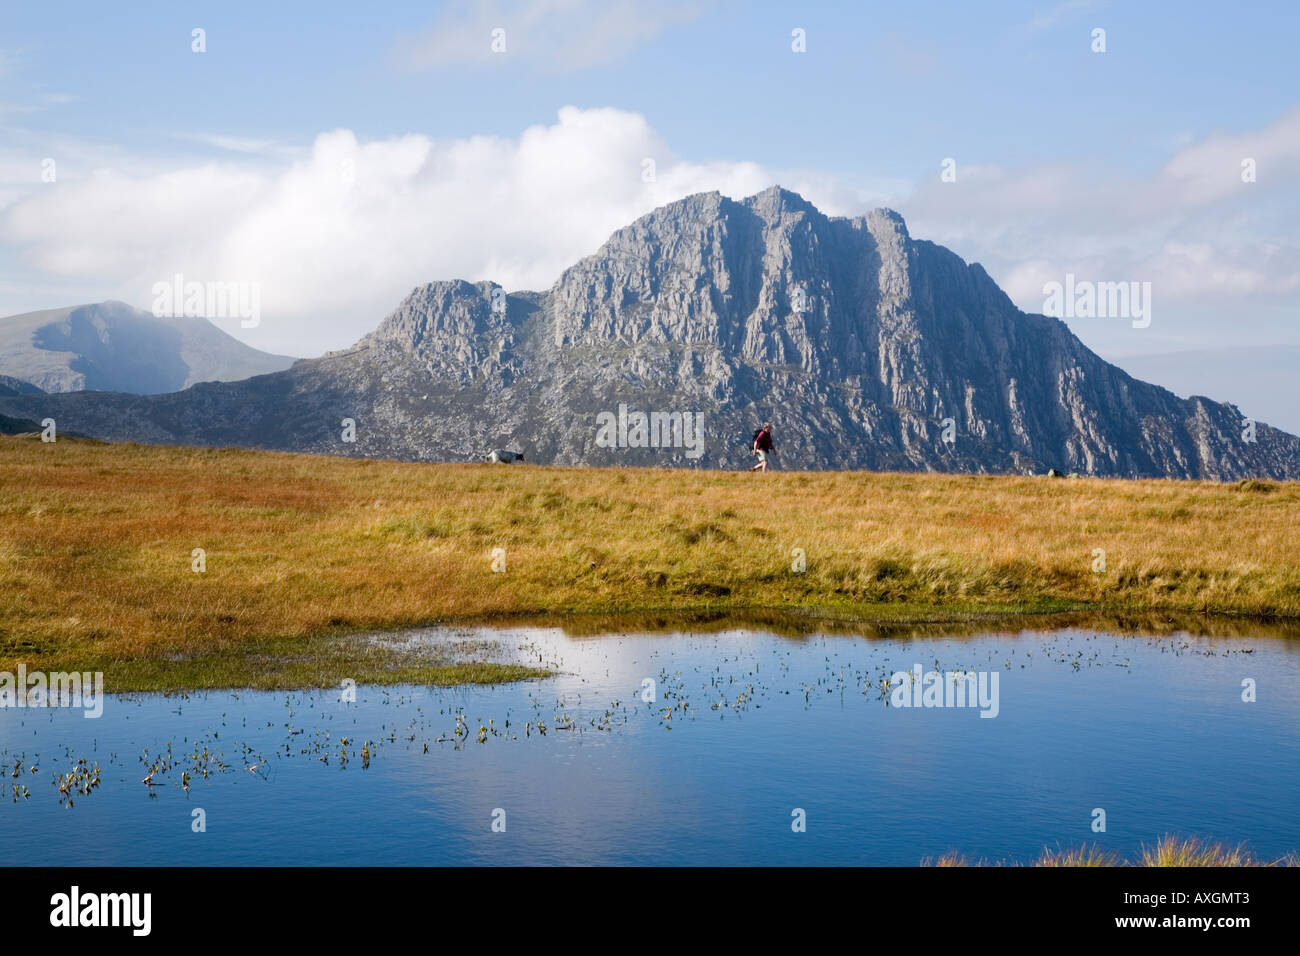 Mount Tryfan mountain peak summit east side across Nant yr Ogof with upland pool in foreground Snowdonia National Park Conwy North Wales UK Britain Stock Photo